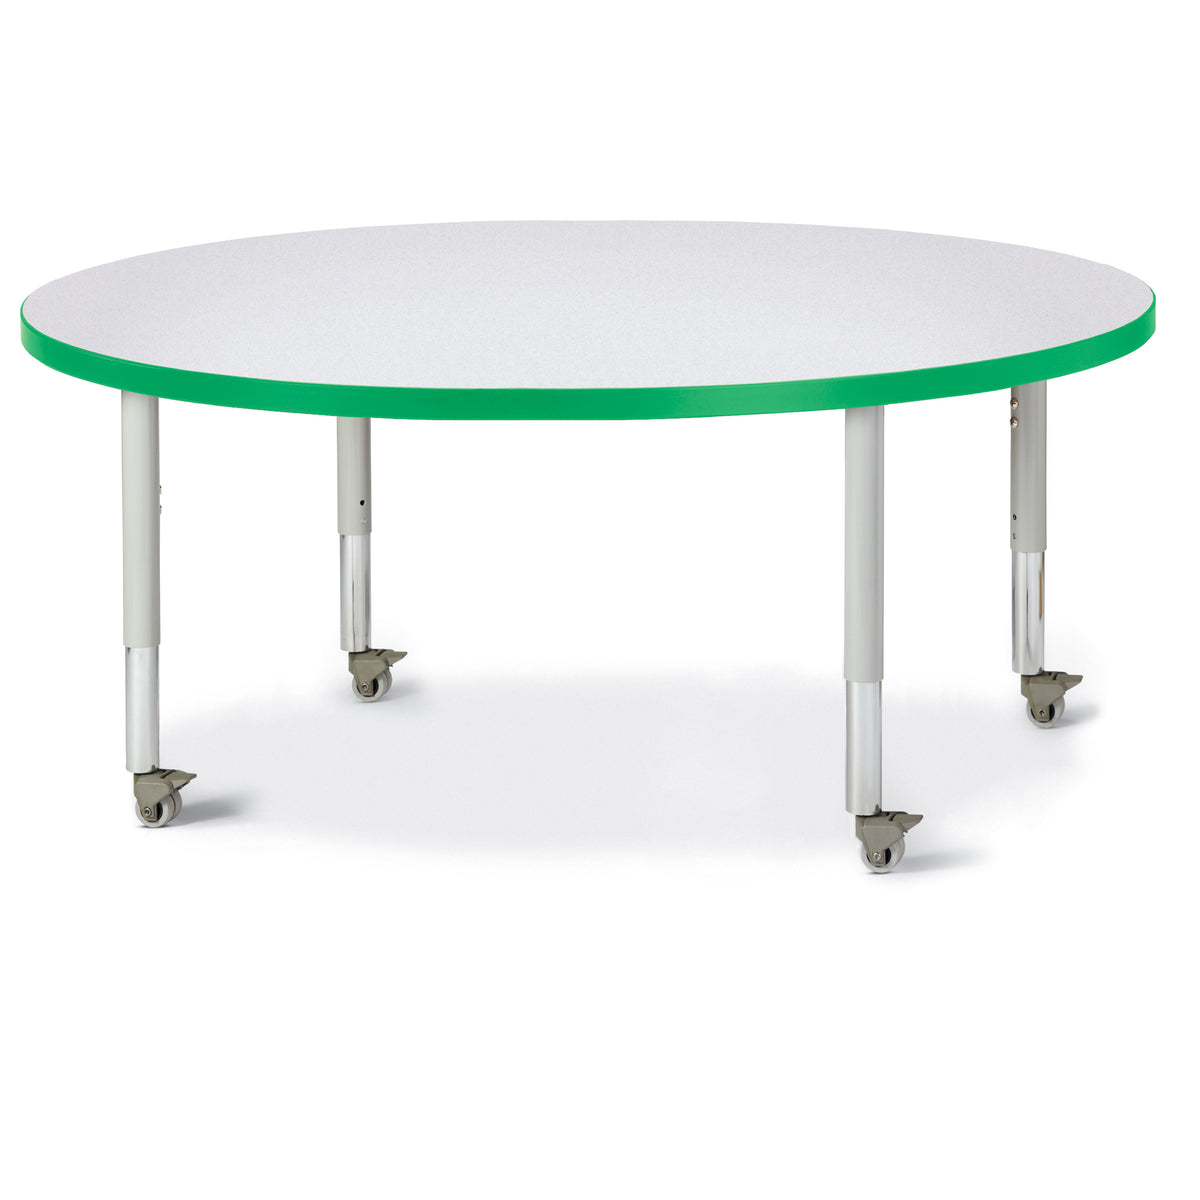 6433JCM119, Berries Round Activity Table - 48" Diameter, Mobile - Freckled Gray/Green/Gray